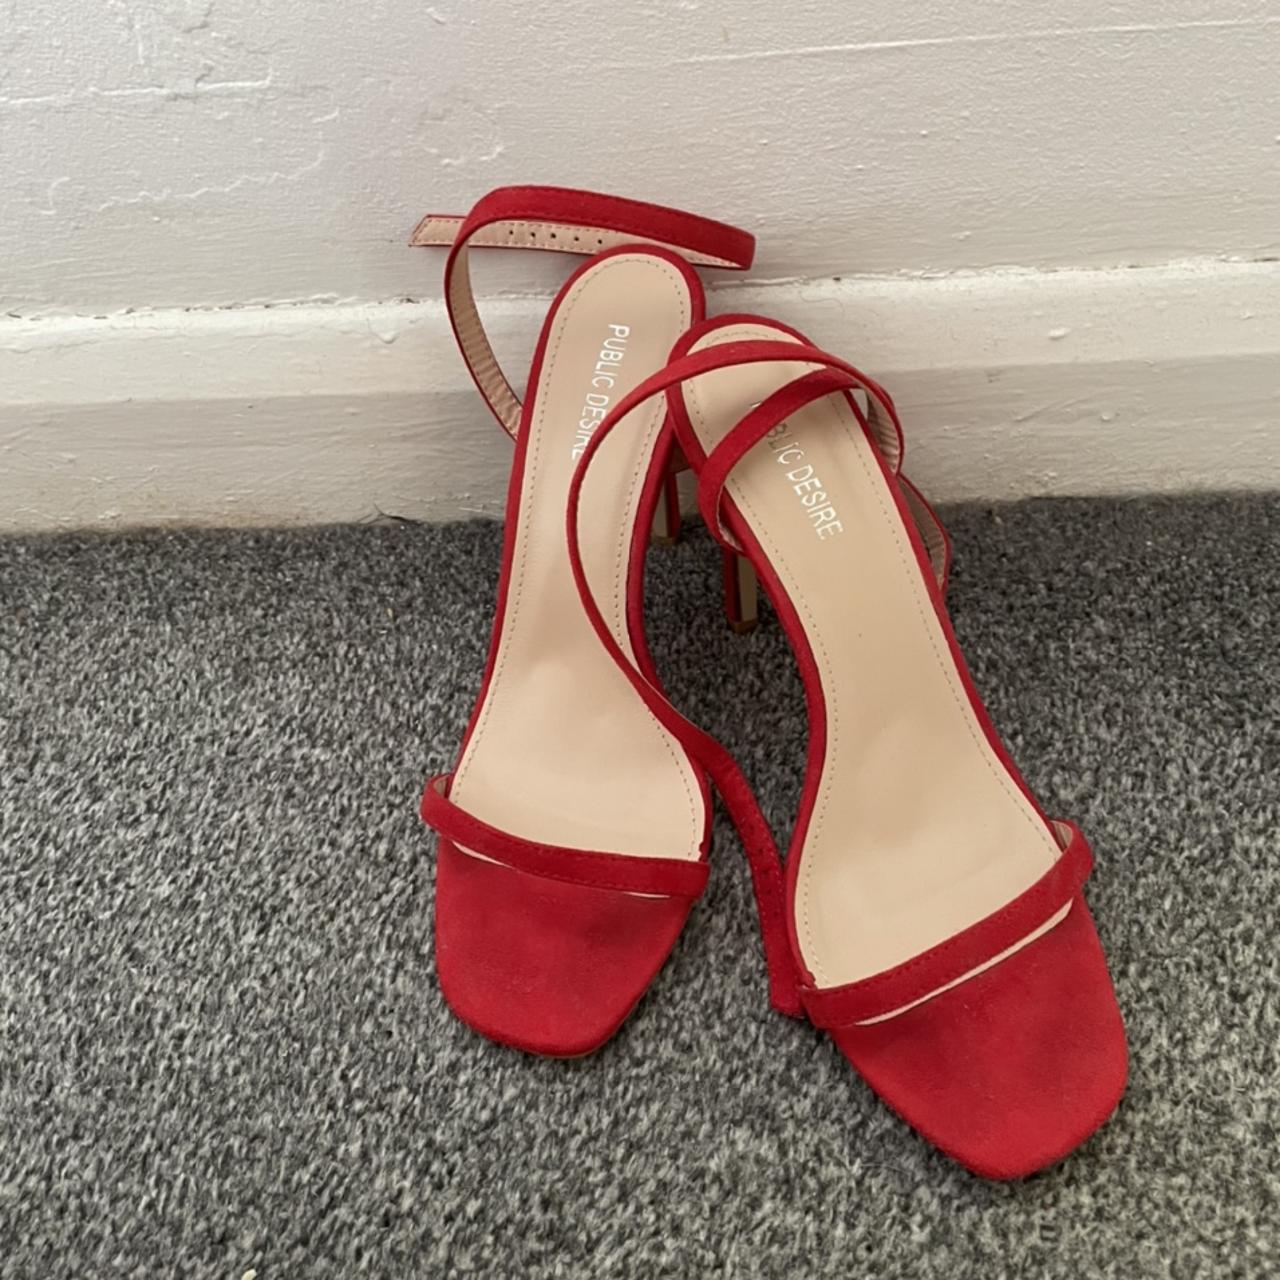 Strappy heels Red strappy sandals Barely there... - Depop